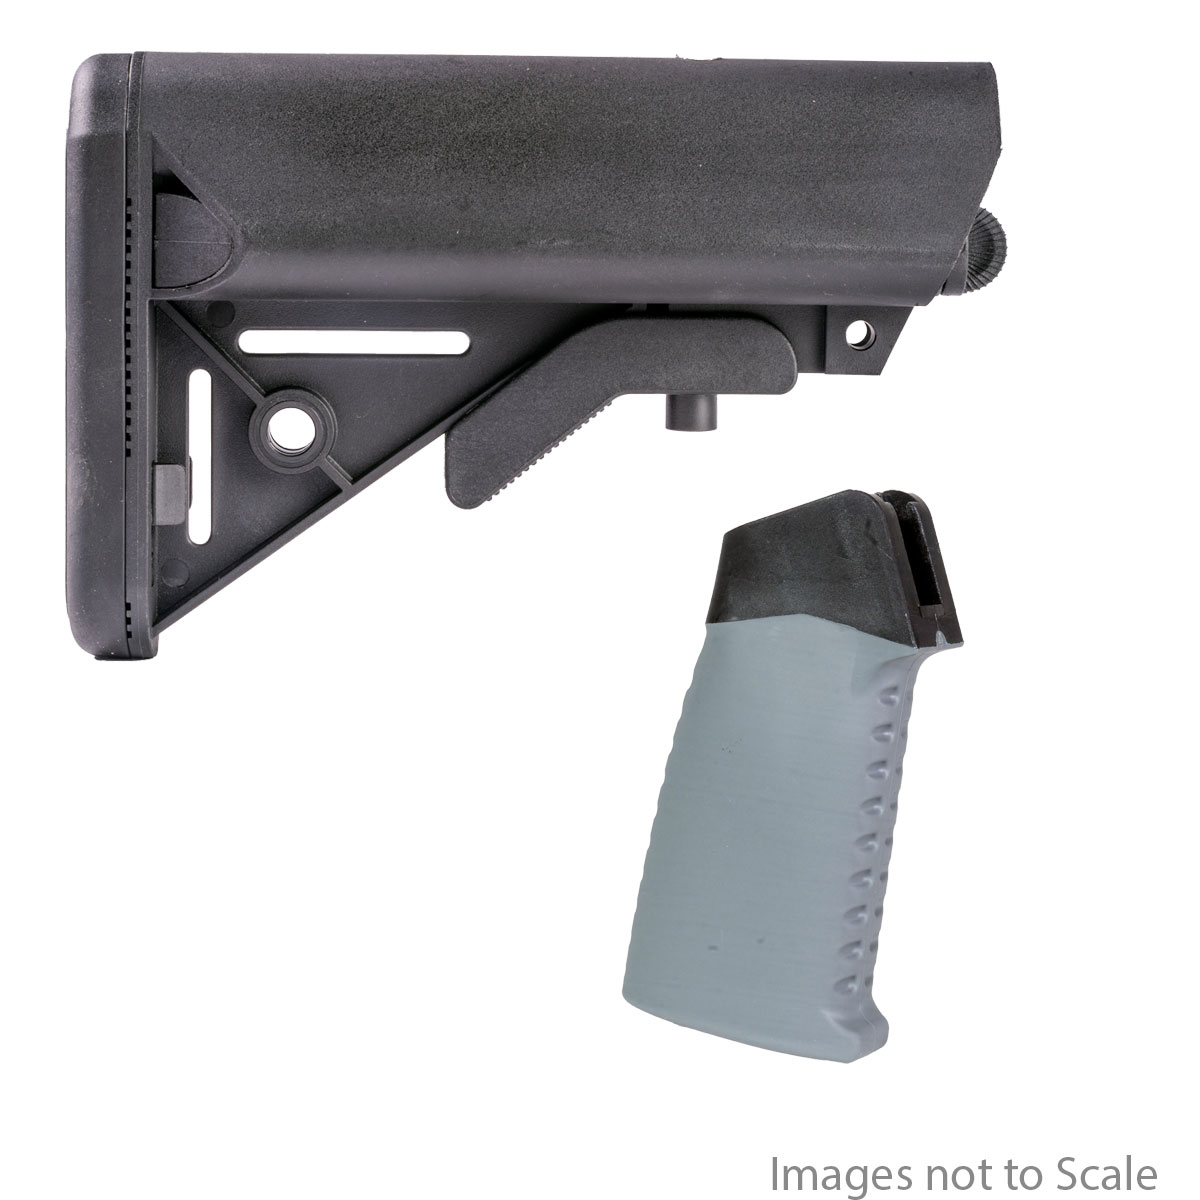 Furniture Upgrade Kit: Team Accessories Corp AR15 Grip Window Grip Straight Top Smooth/Ribbed Gray  + Gauntlet Arms SOPMOD Style Collapsible Stock with Storage Compartments